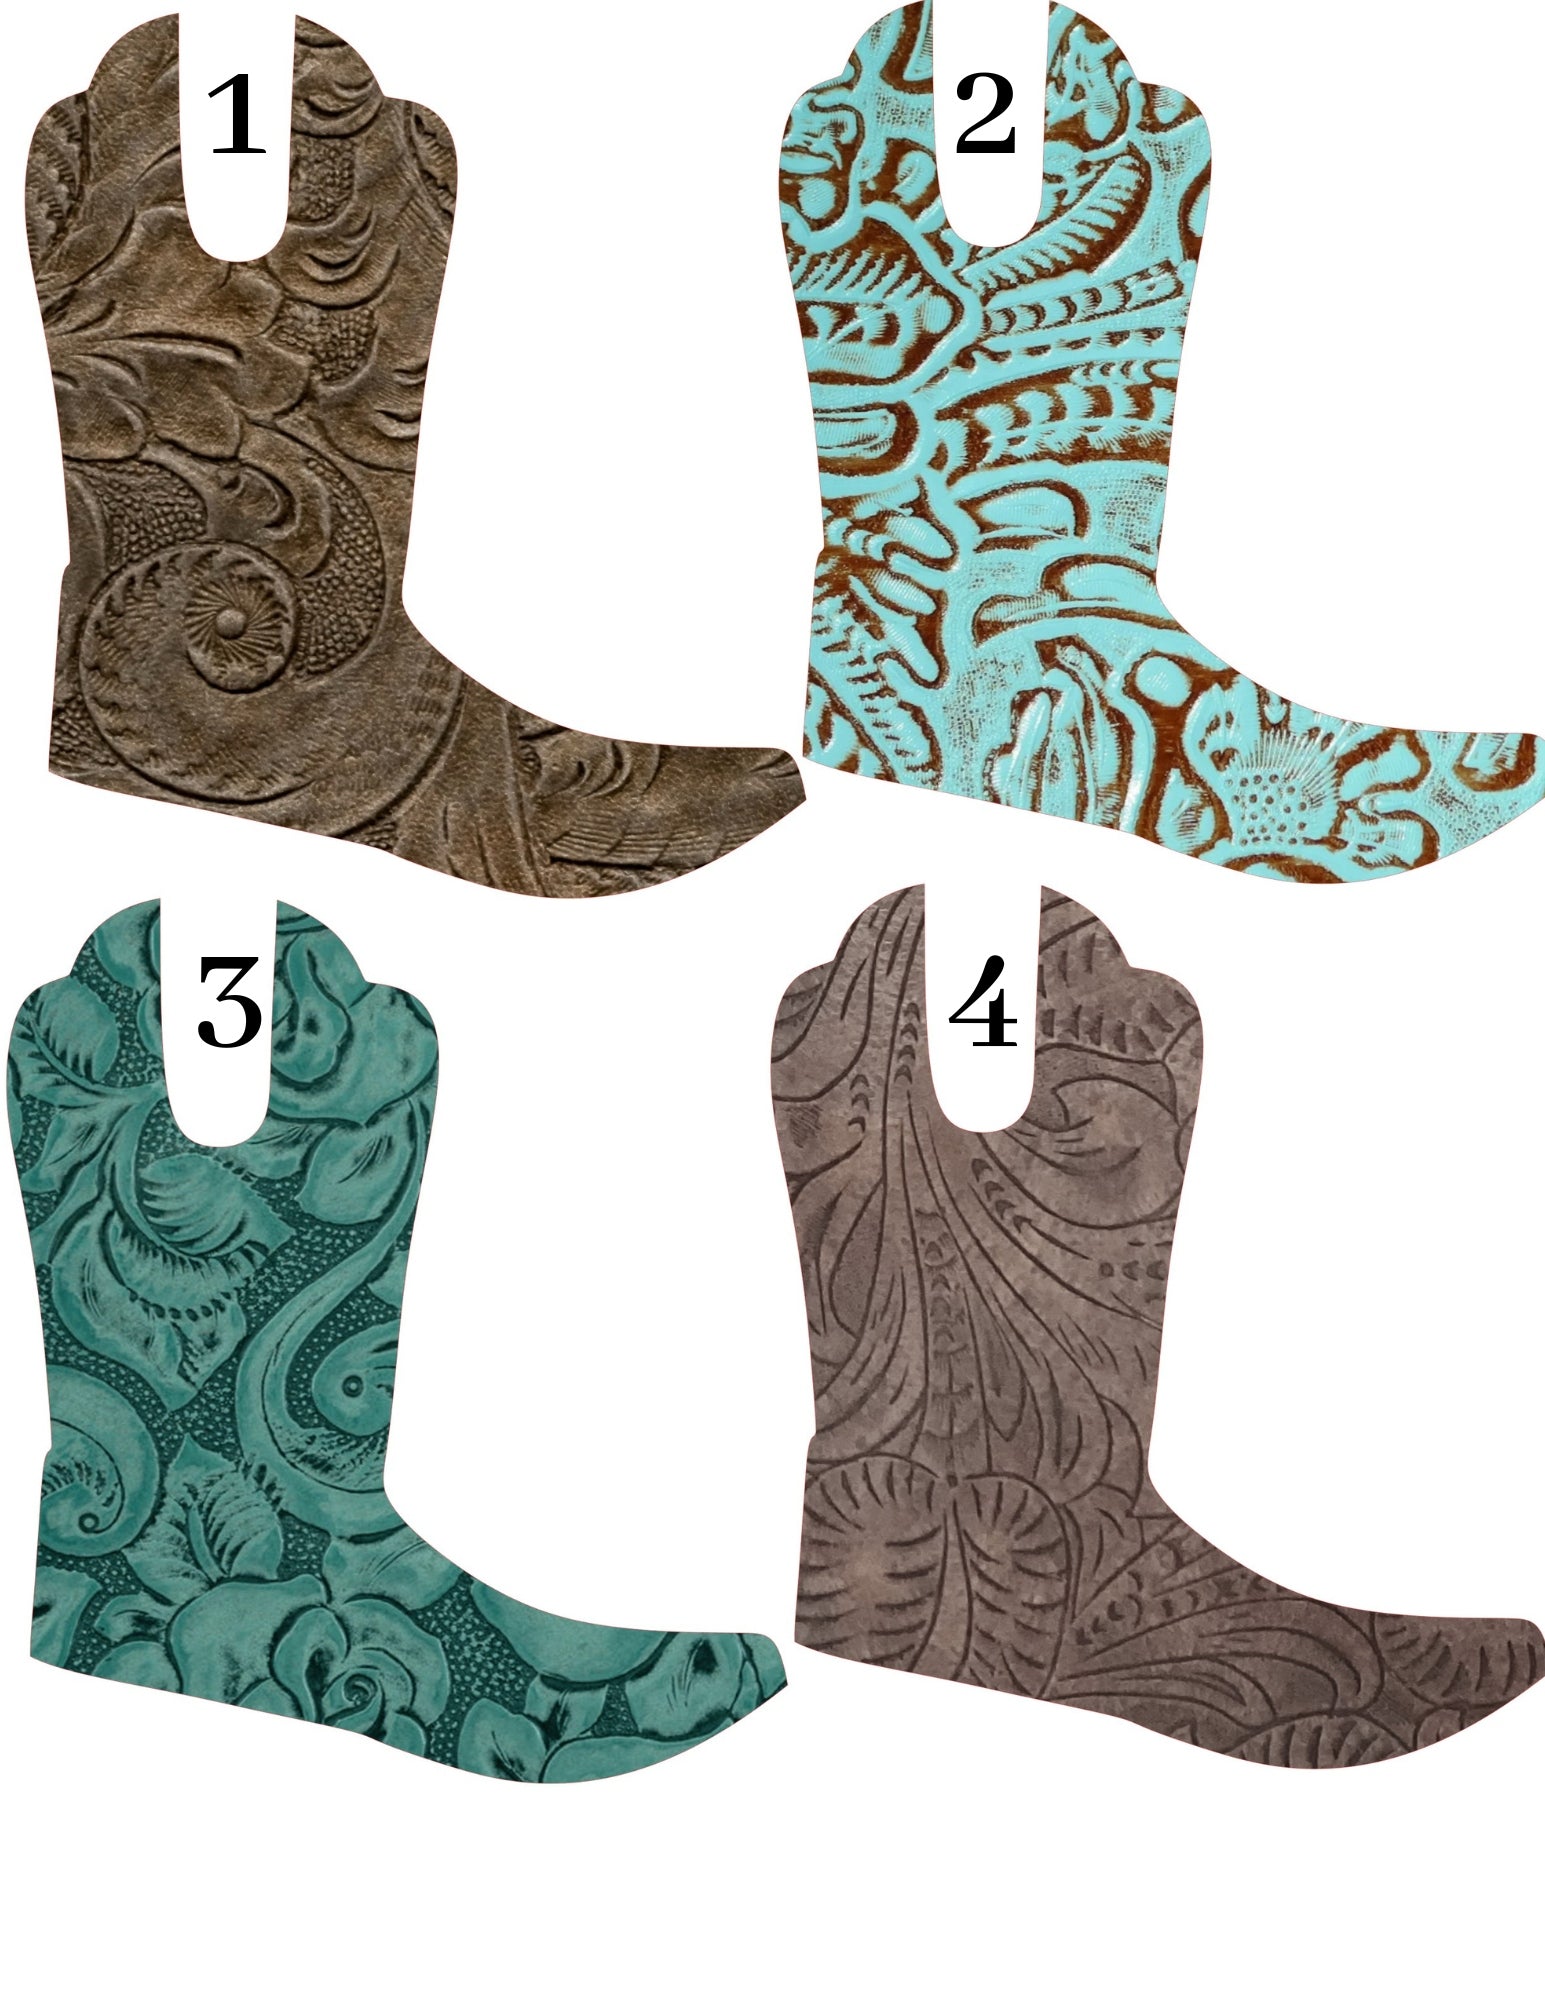 Simple Boot Cardstock Listing #1-16